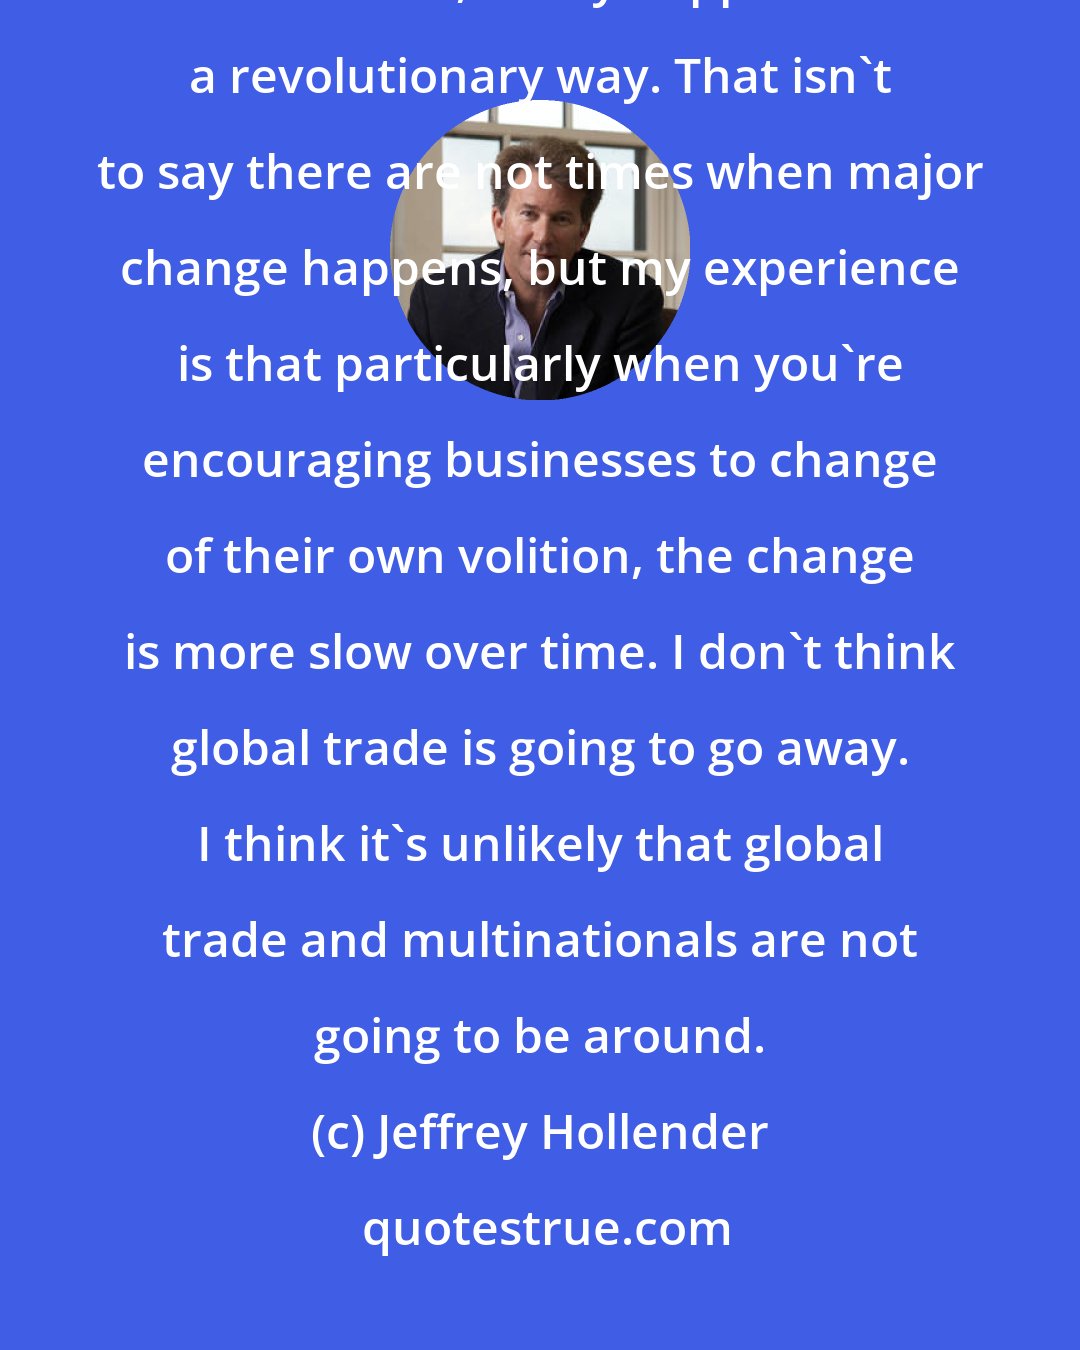 Jeffrey Hollender: My experience to date has been that change, particularly relative to business, rarely happens in a revolutionary way. That isn't to say there are not times when major change happens, but my experience is that particularly when you're encouraging businesses to change of their own volition, the change is more slow over time. I don't think global trade is going to go away. I think it's unlikely that global trade and multinationals are not going to be around.